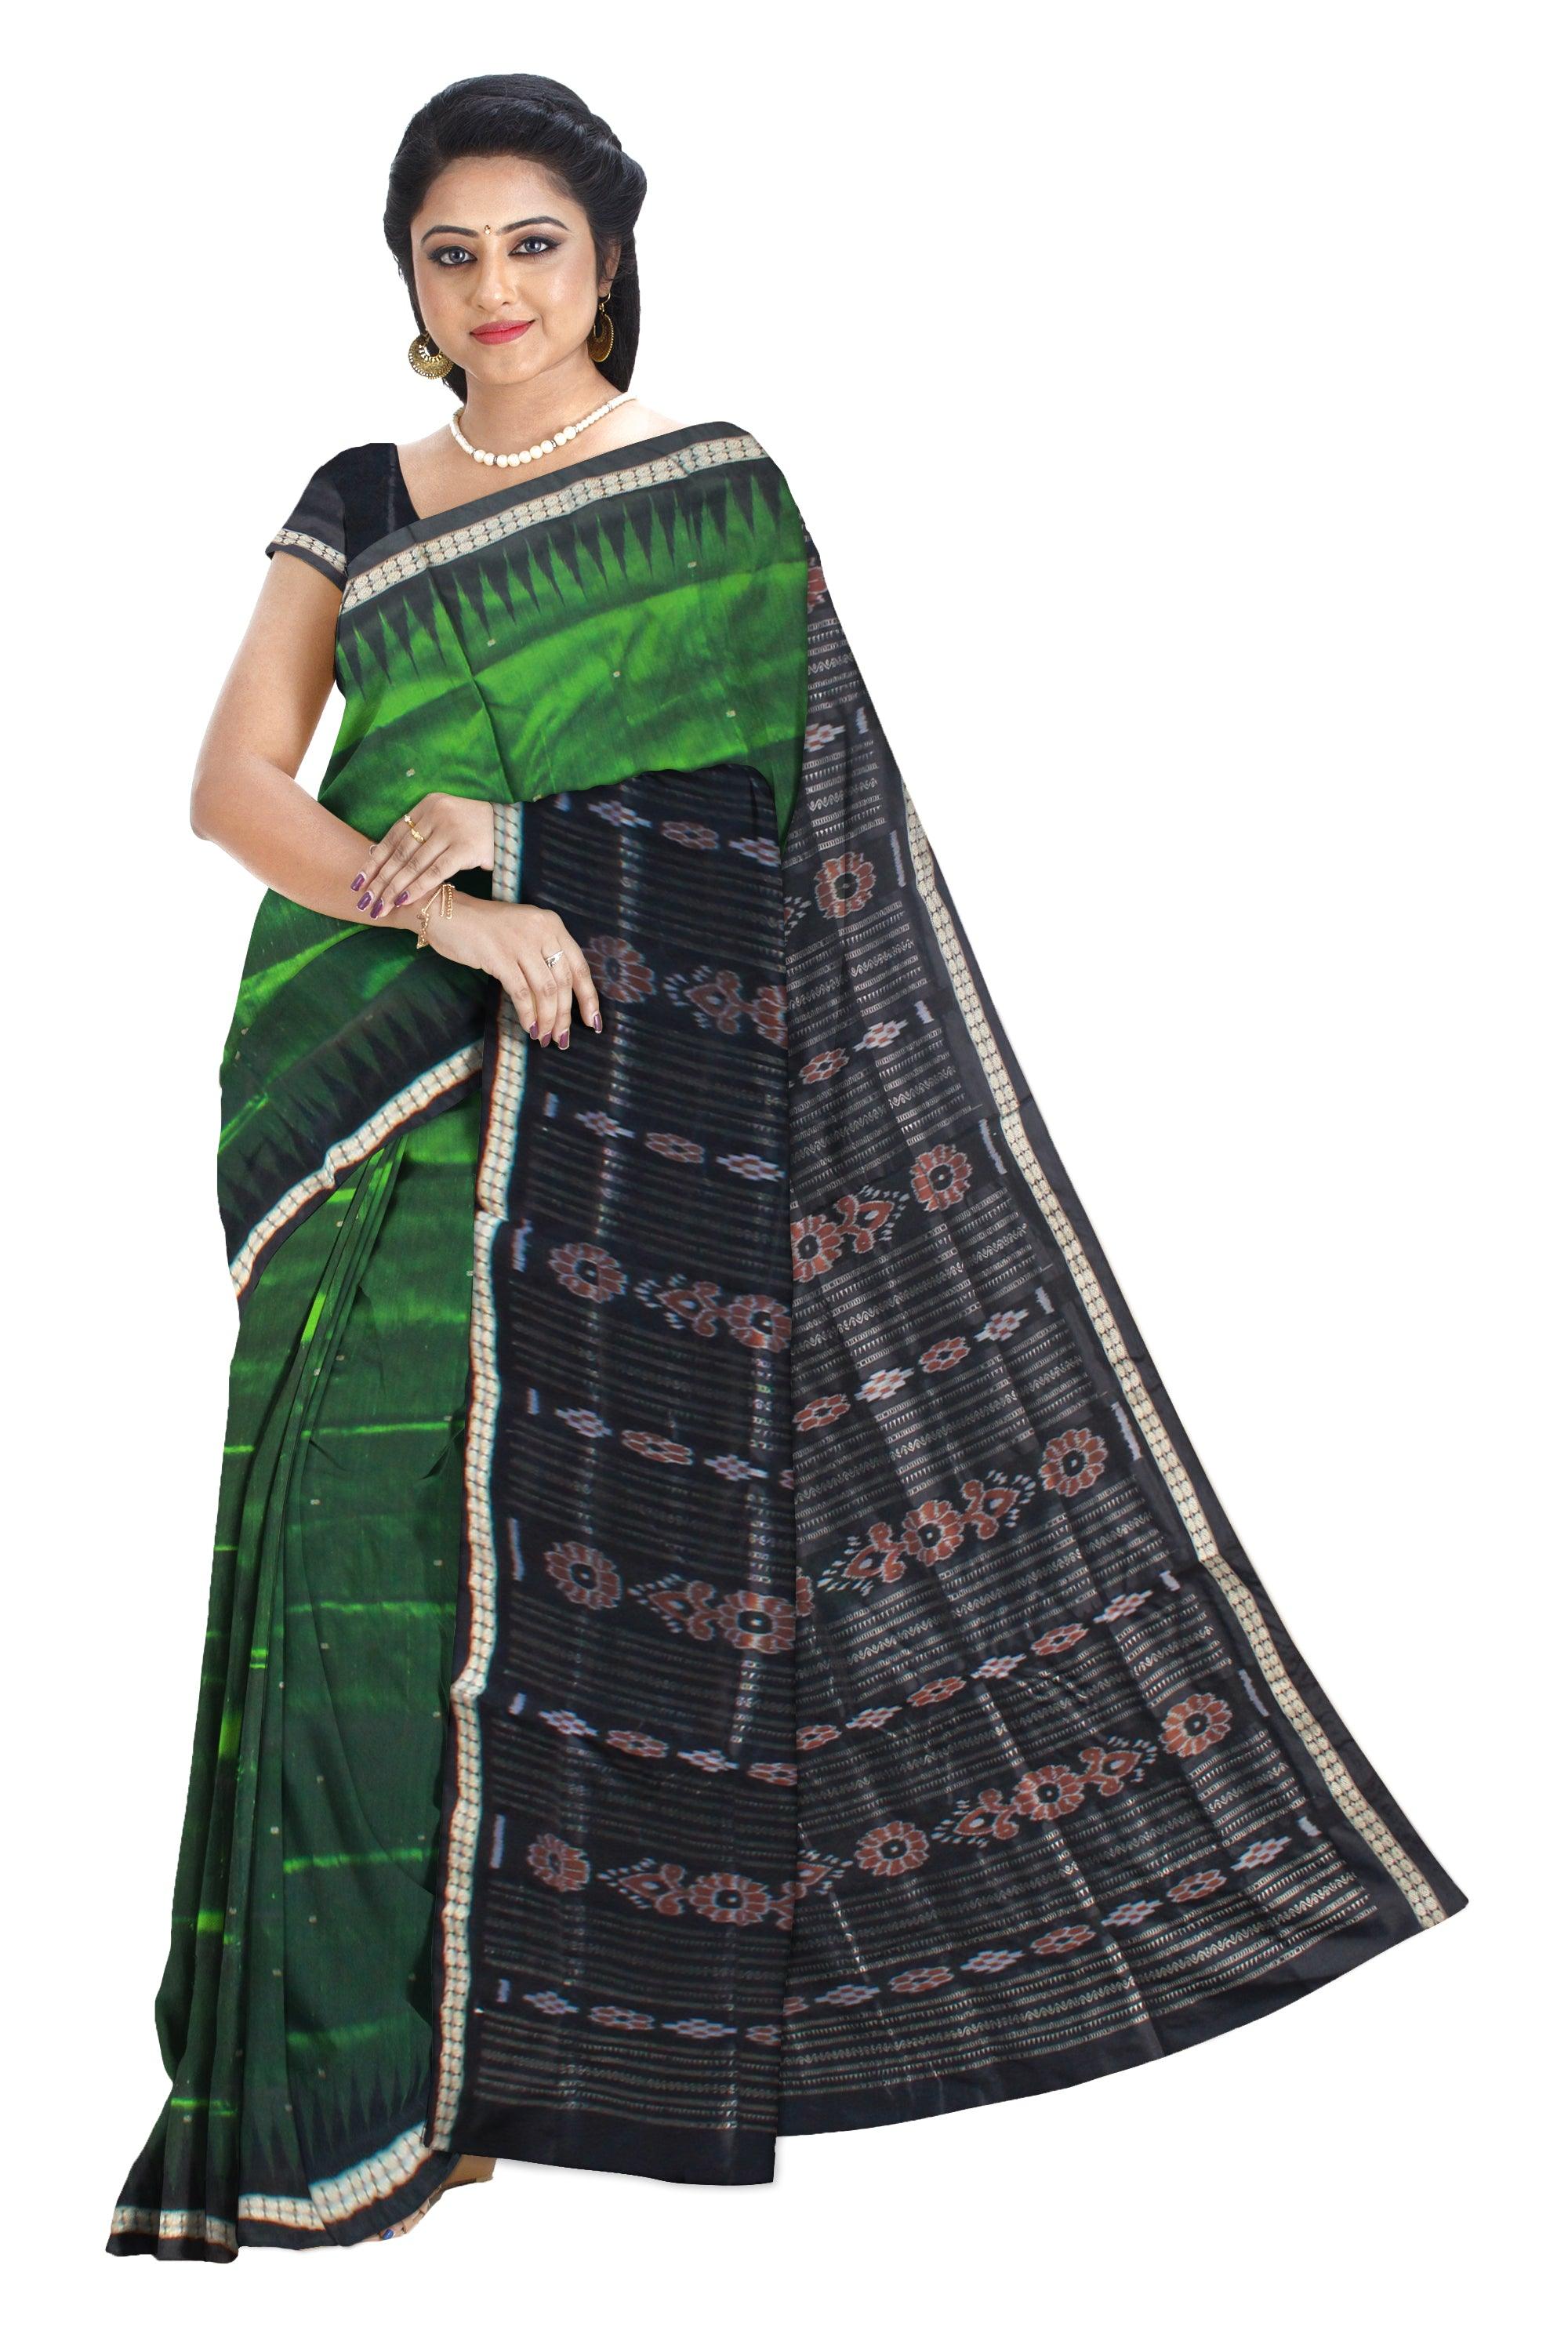 DARK GREEN AND BLACK COLOR BOOTY PATTERN SONEPUR PATA SAREE, ATTACHED WITH BLOUSE PIECE. - Koshali Arts & Crafts Enterprise